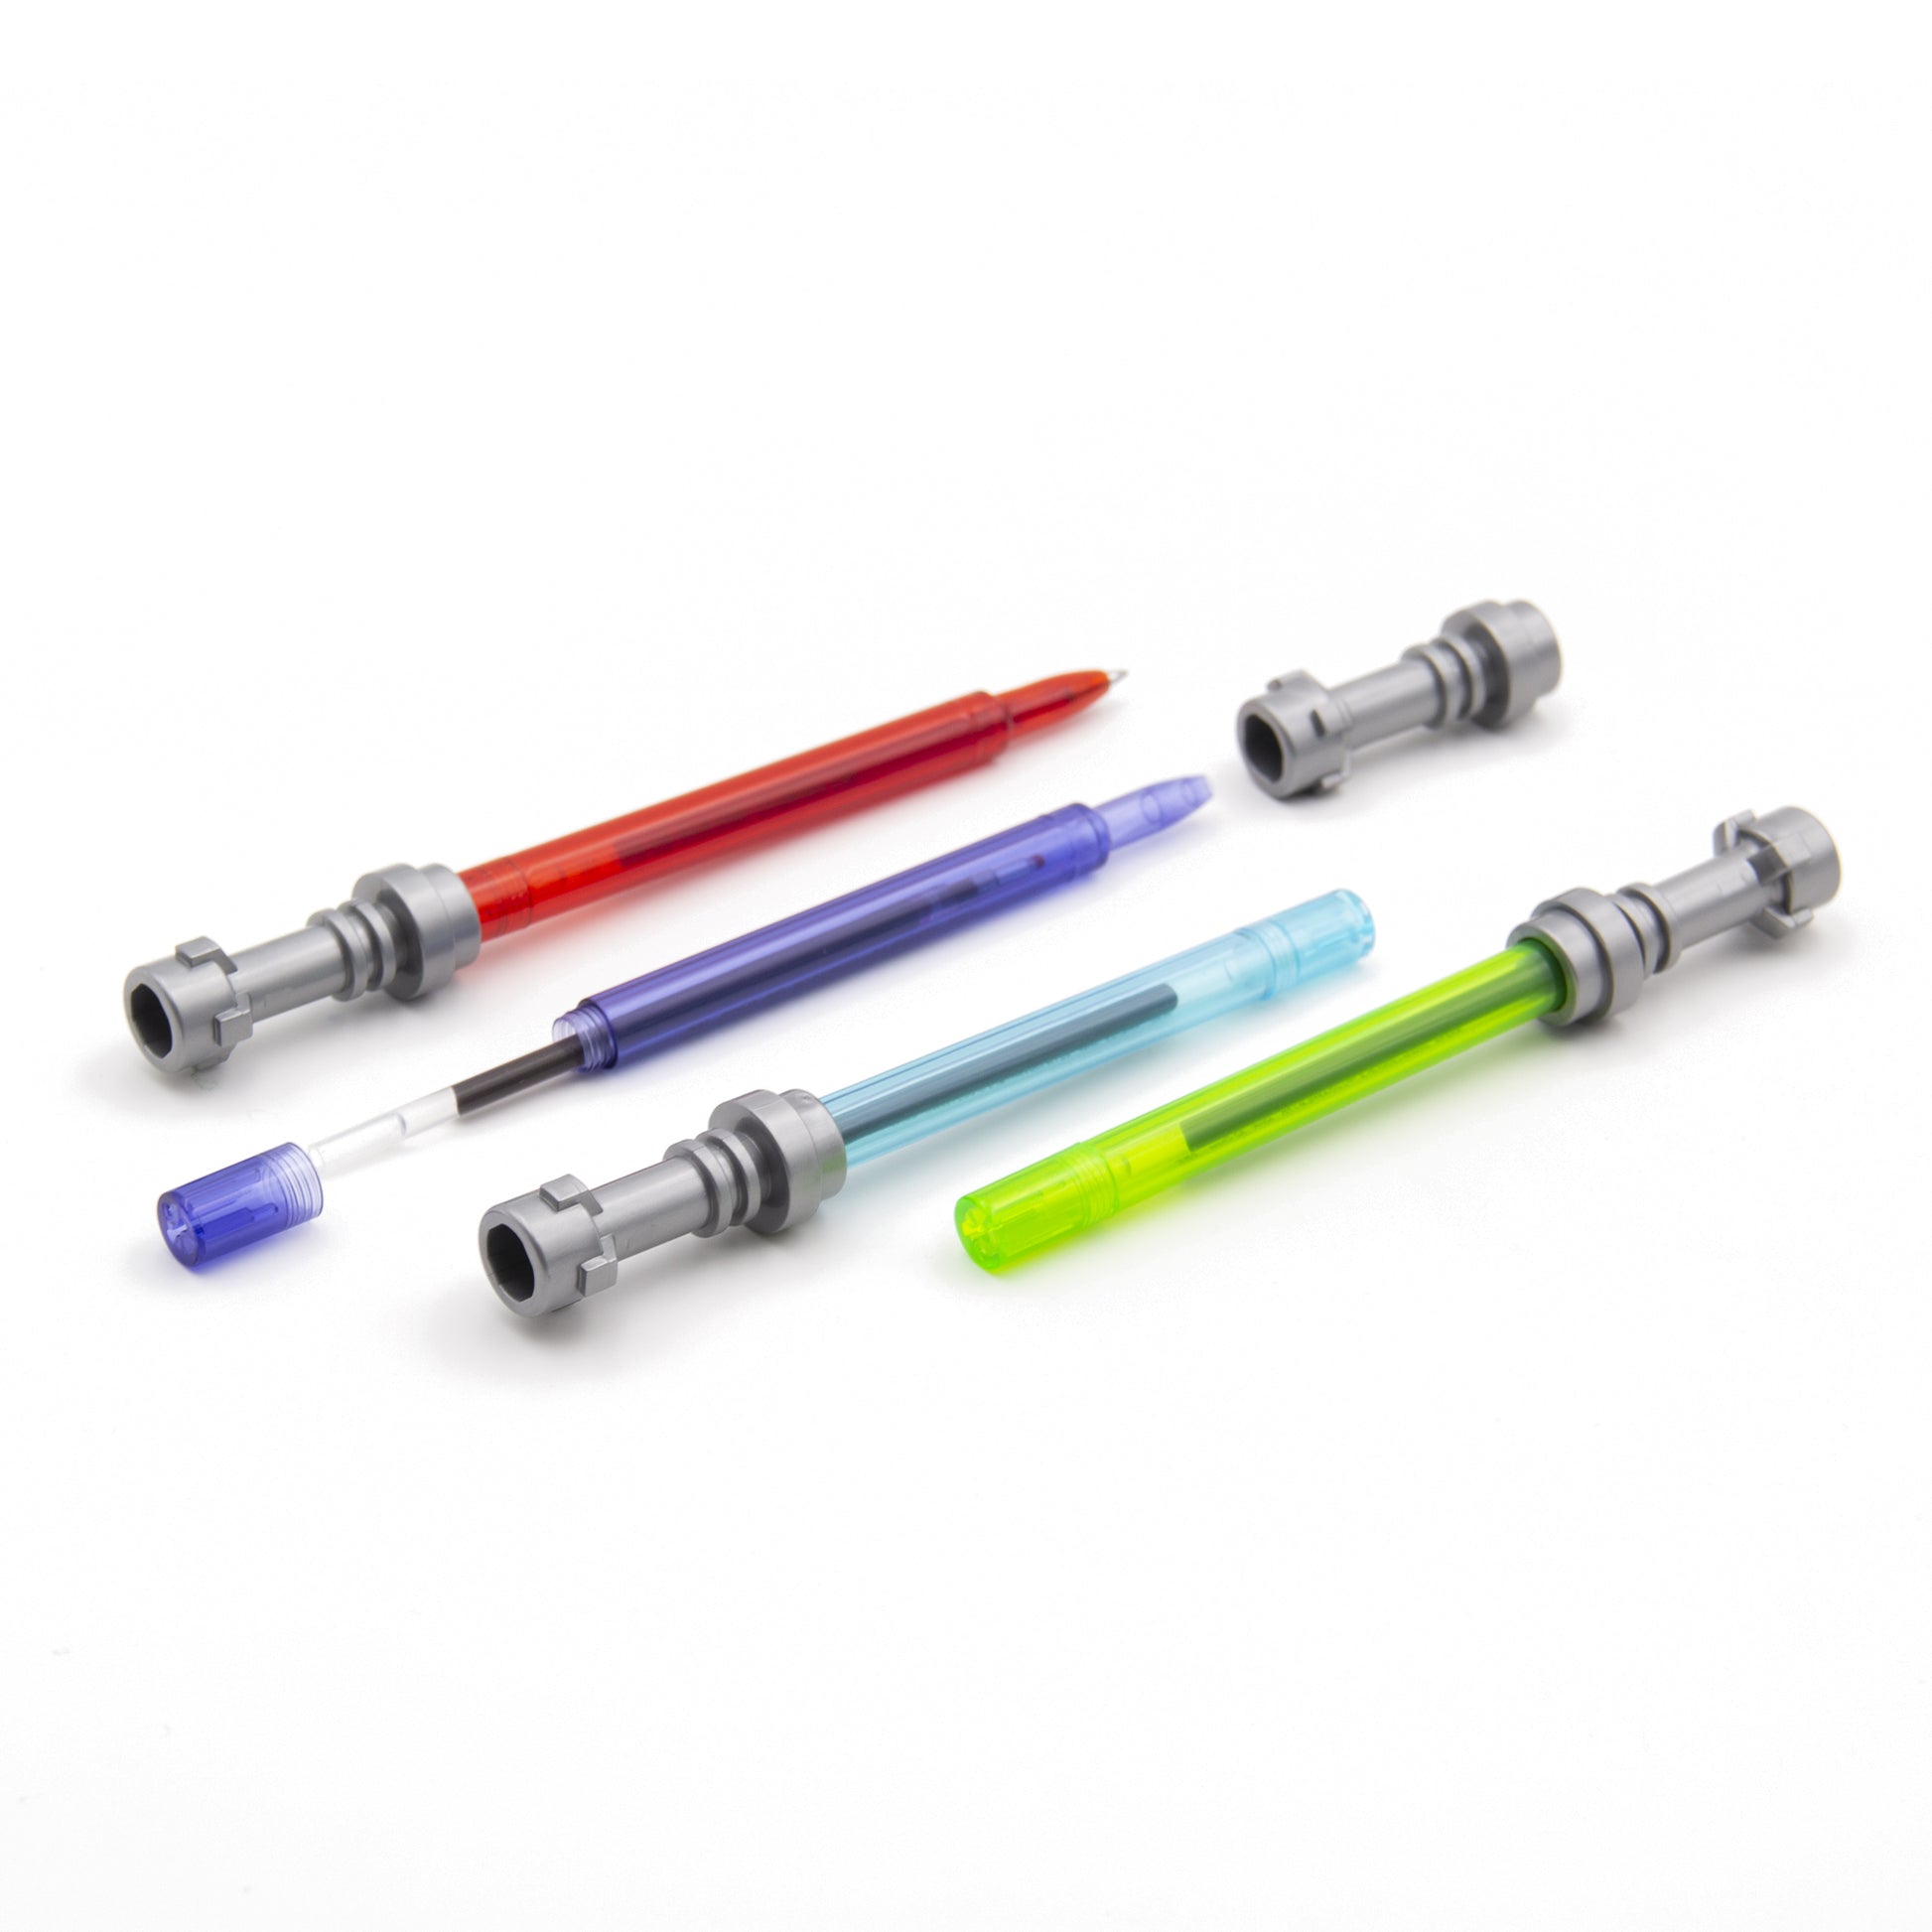 Star Wars Lightsaber Pens (BIC) by PhilippHee